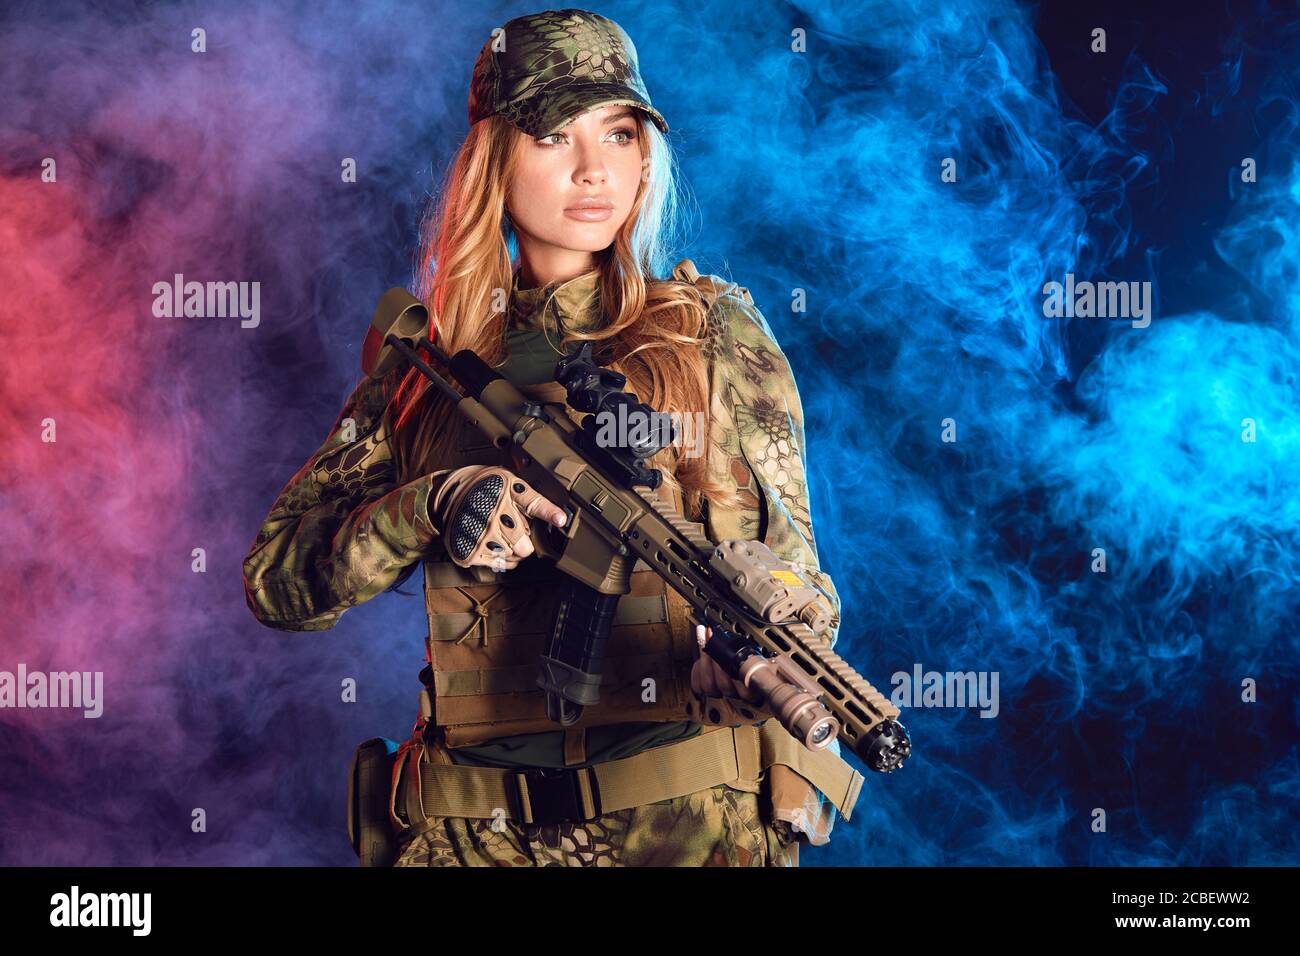 Female soldier in military camouflage uniform and cap holding sniper rifle over black background with smoky clouds Stock Photo